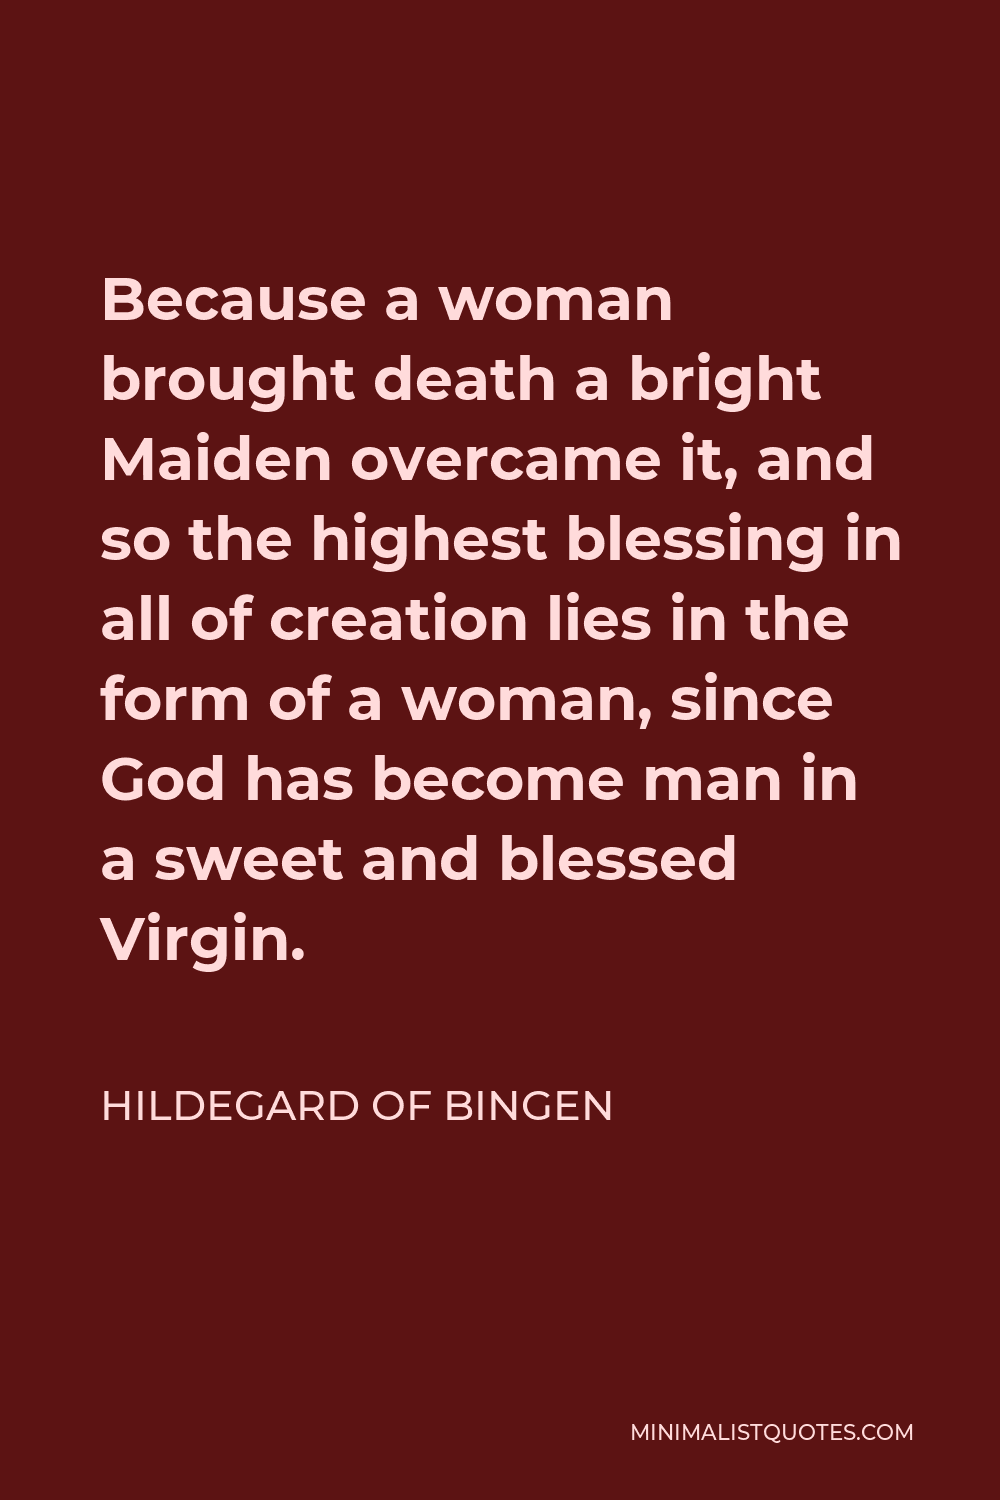 Hildegard of Bingen Quote - Because a woman brought death a bright Maiden overcame it, and so the highest blessing in all of creation lies in the form of a woman, since God has become man in a sweet and blessed Virgin.